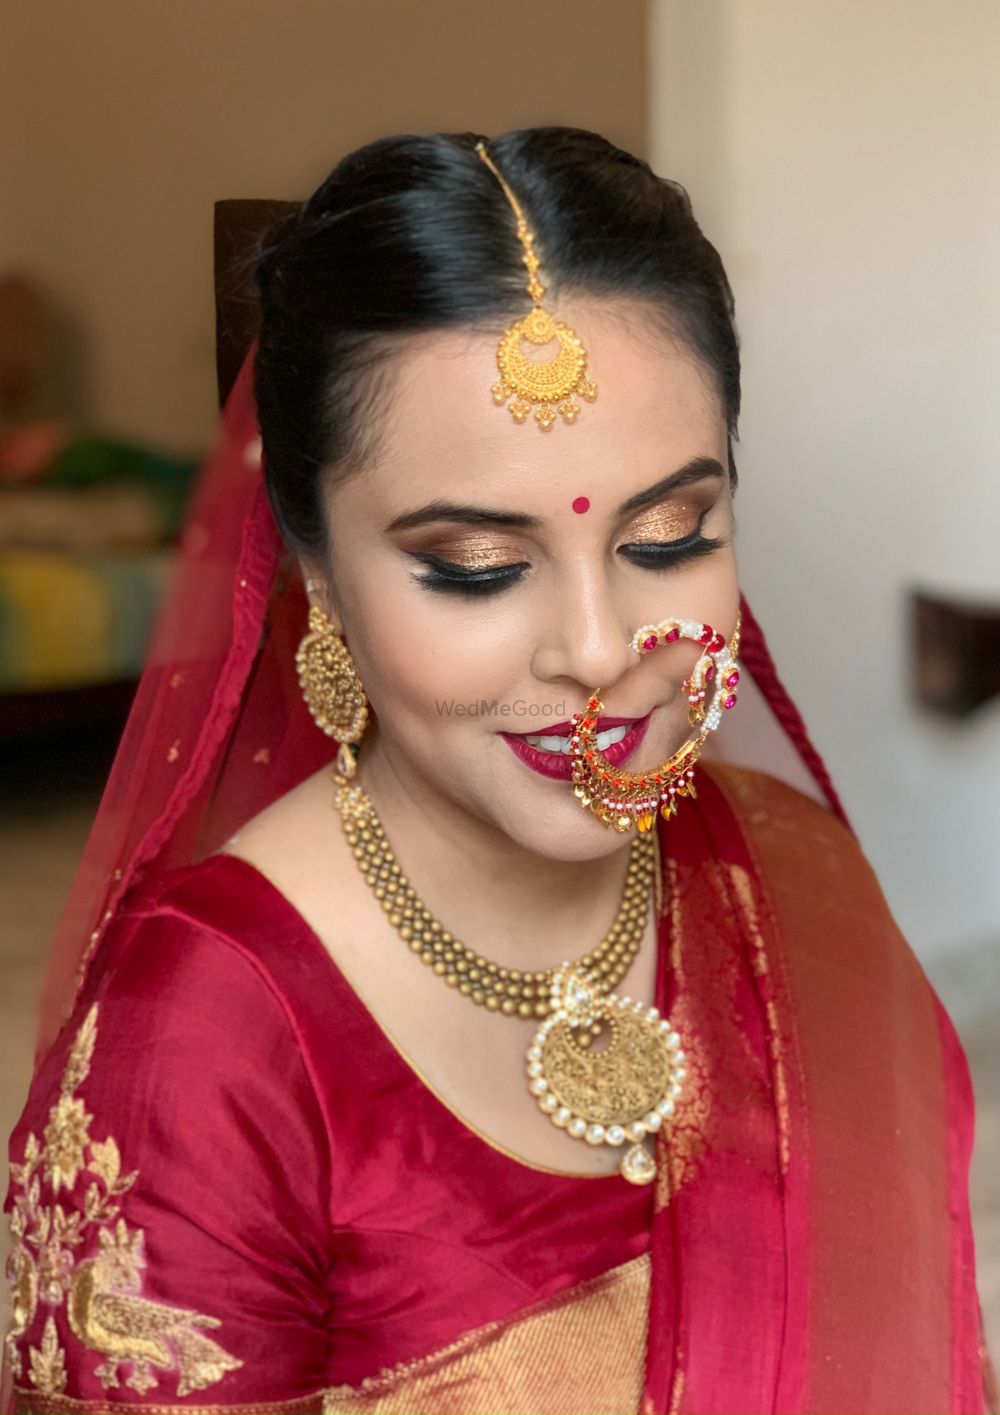 Photo From Prarthna - By Tanvi KG Makeup